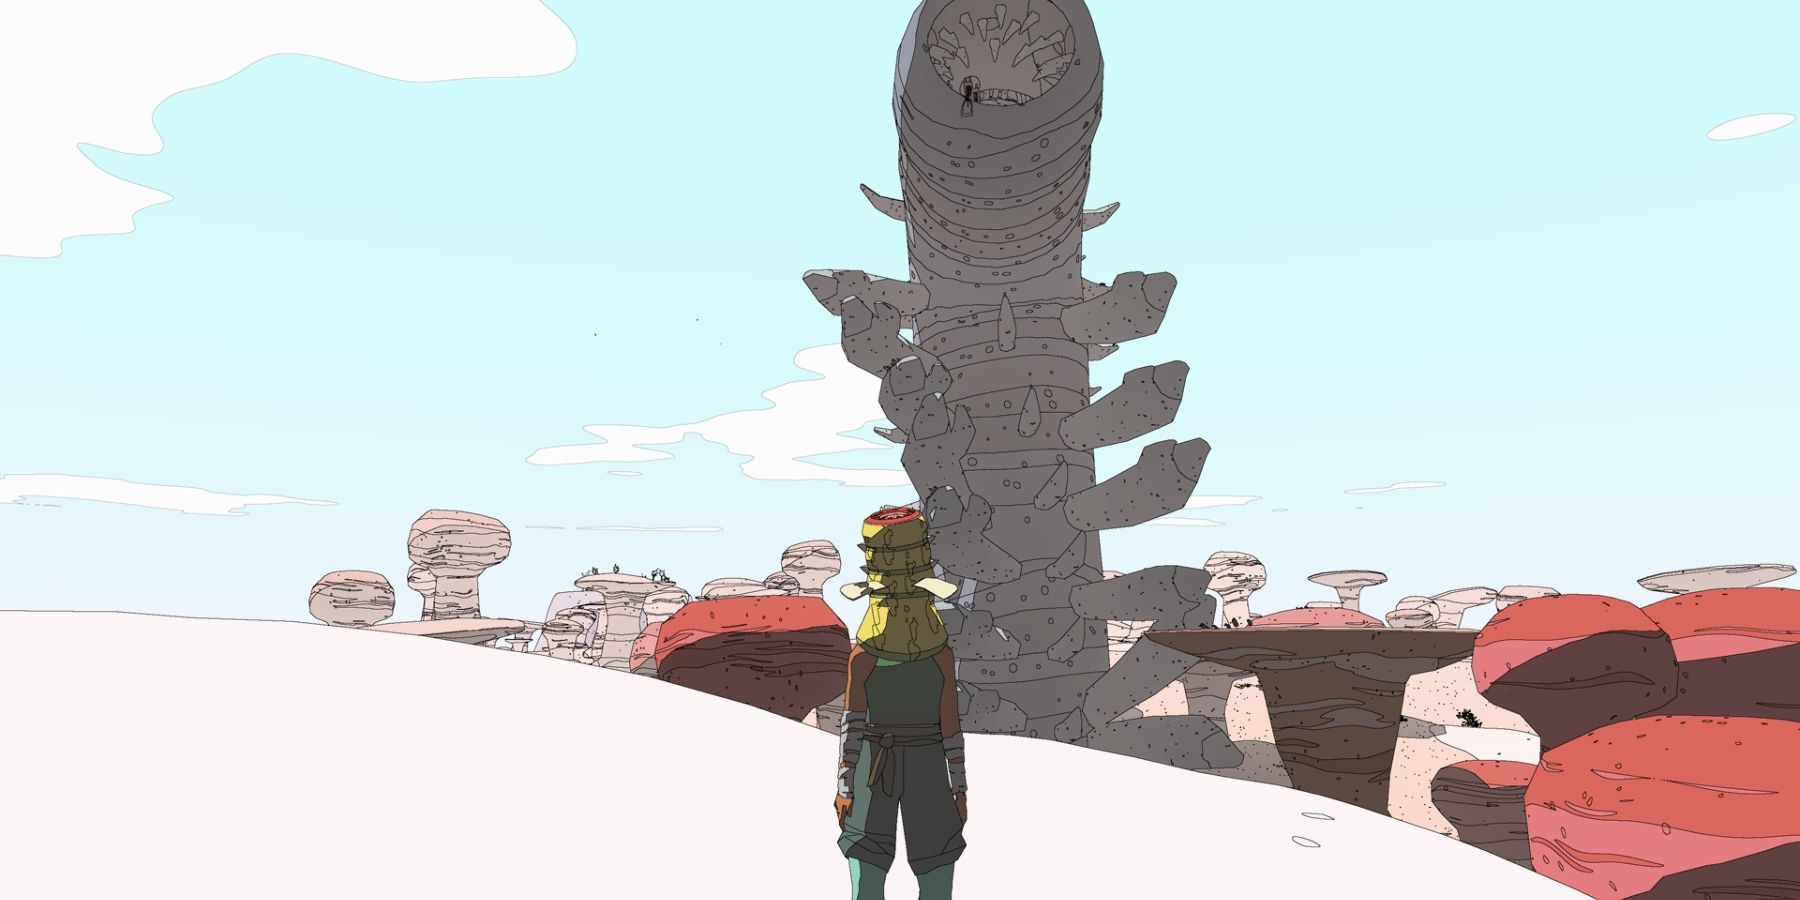 Sable in a sandworm mask standing in front of a large, stone sandworm